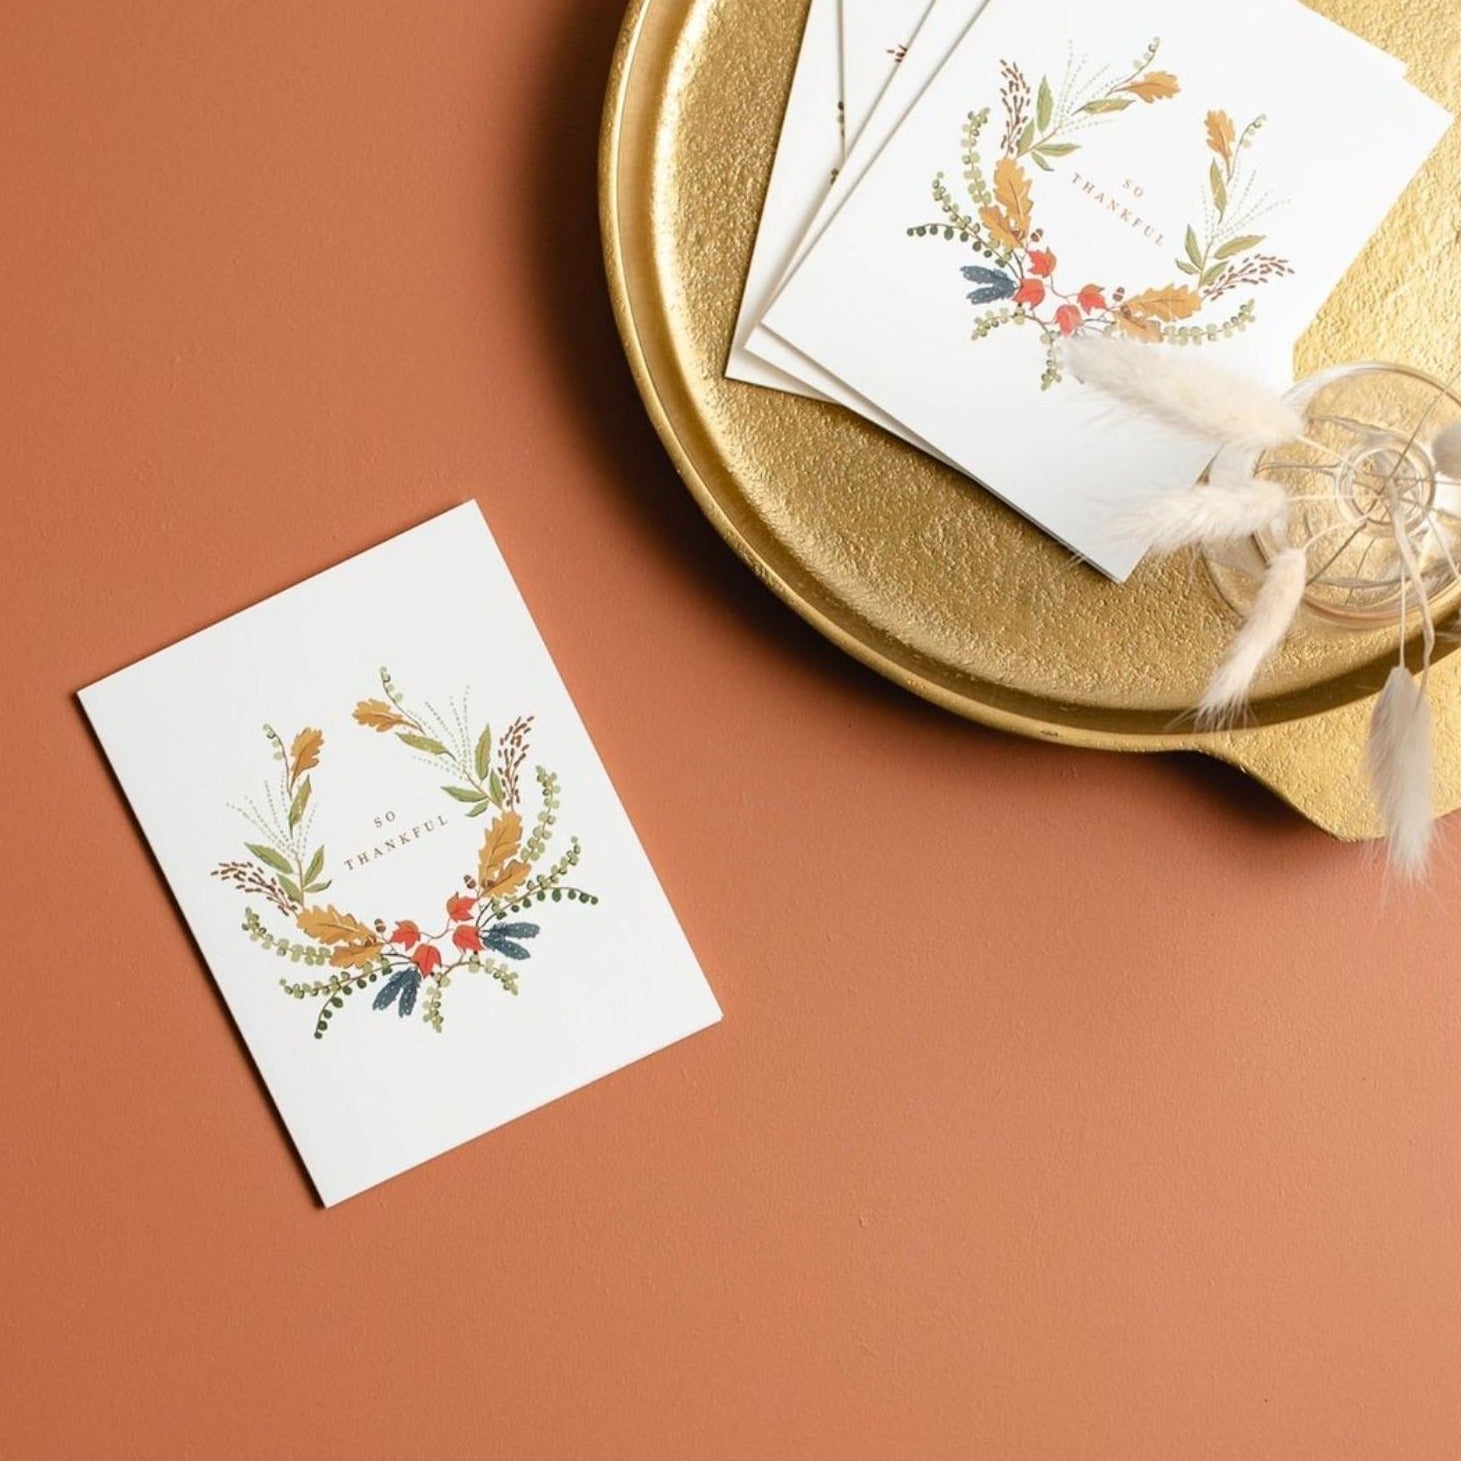 Illustrated Thanksgiving card with a wreath of fall-colored florals surrounding the gold foil words 'So Thankful' on warm white cardstock.